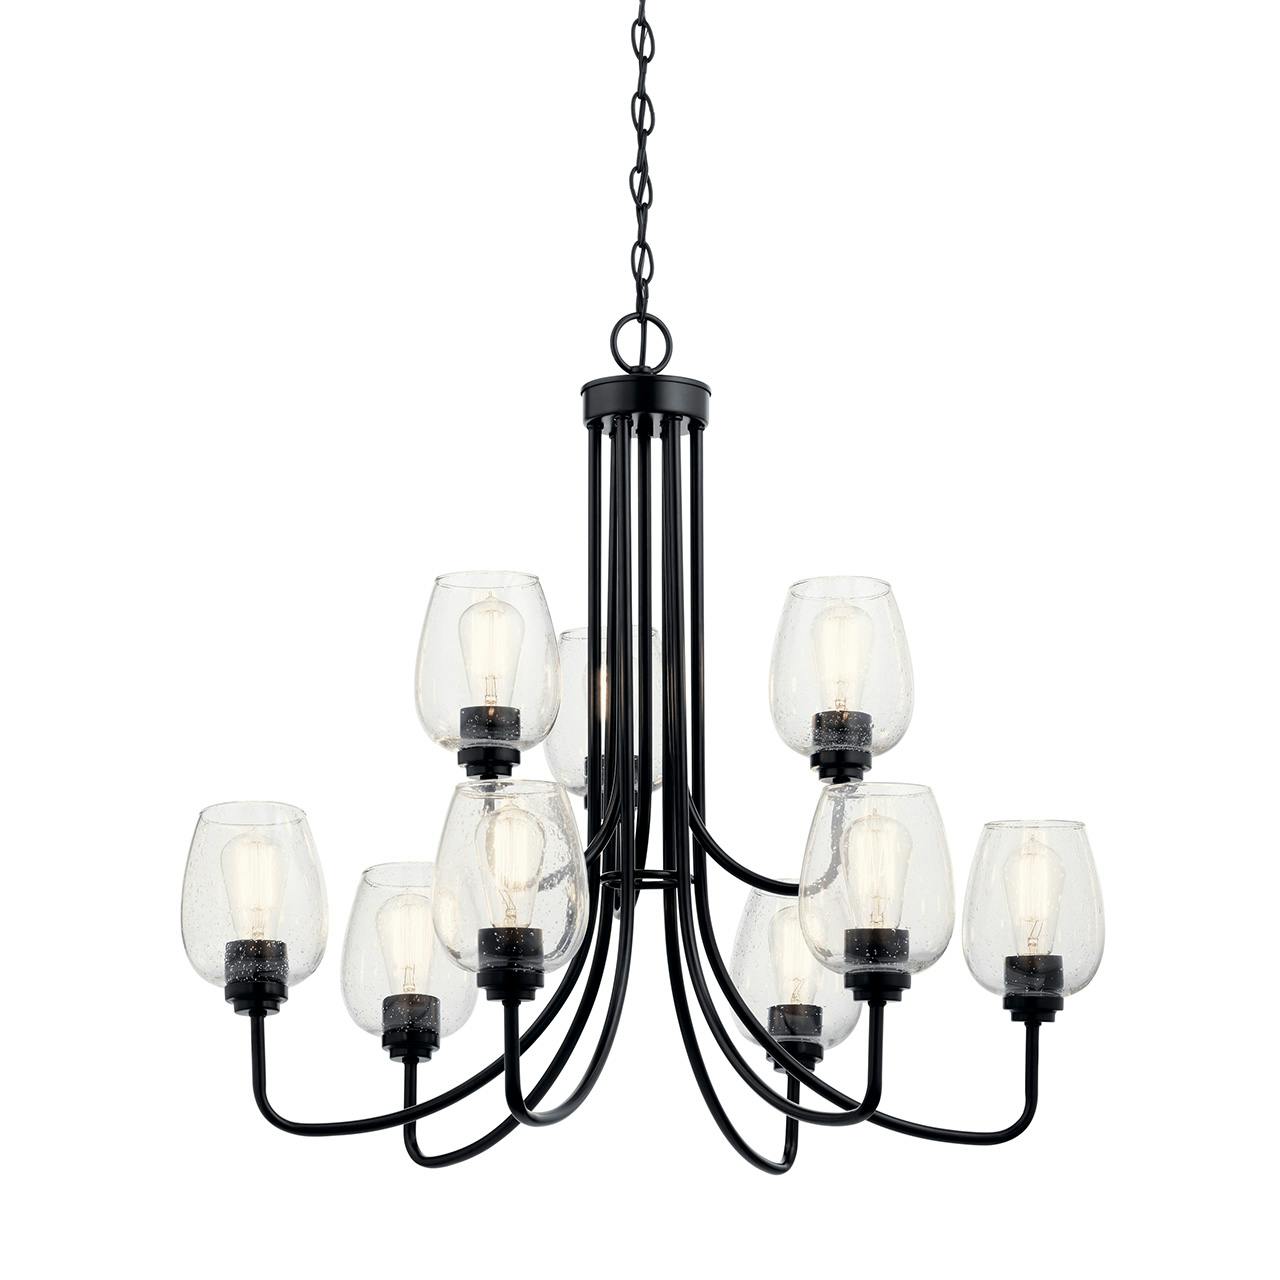 Valserrano™ 9 Light Chandelier Black without the canopy on a white background